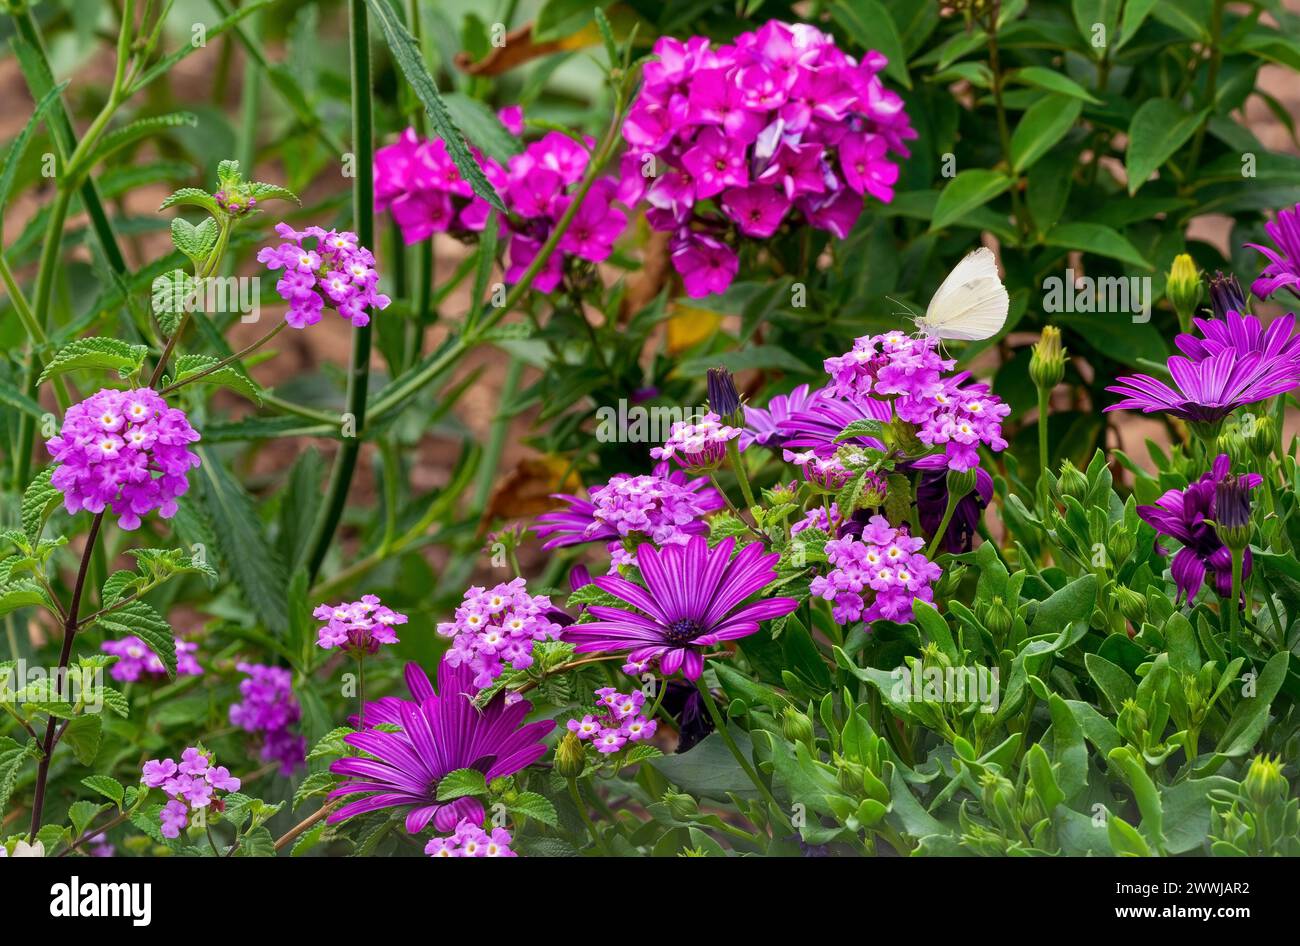 A Cabbage White butterfly sits atop a blooming pink flower garden planted with African Daisies, Lantana and Phlox flowers. Stock Photo